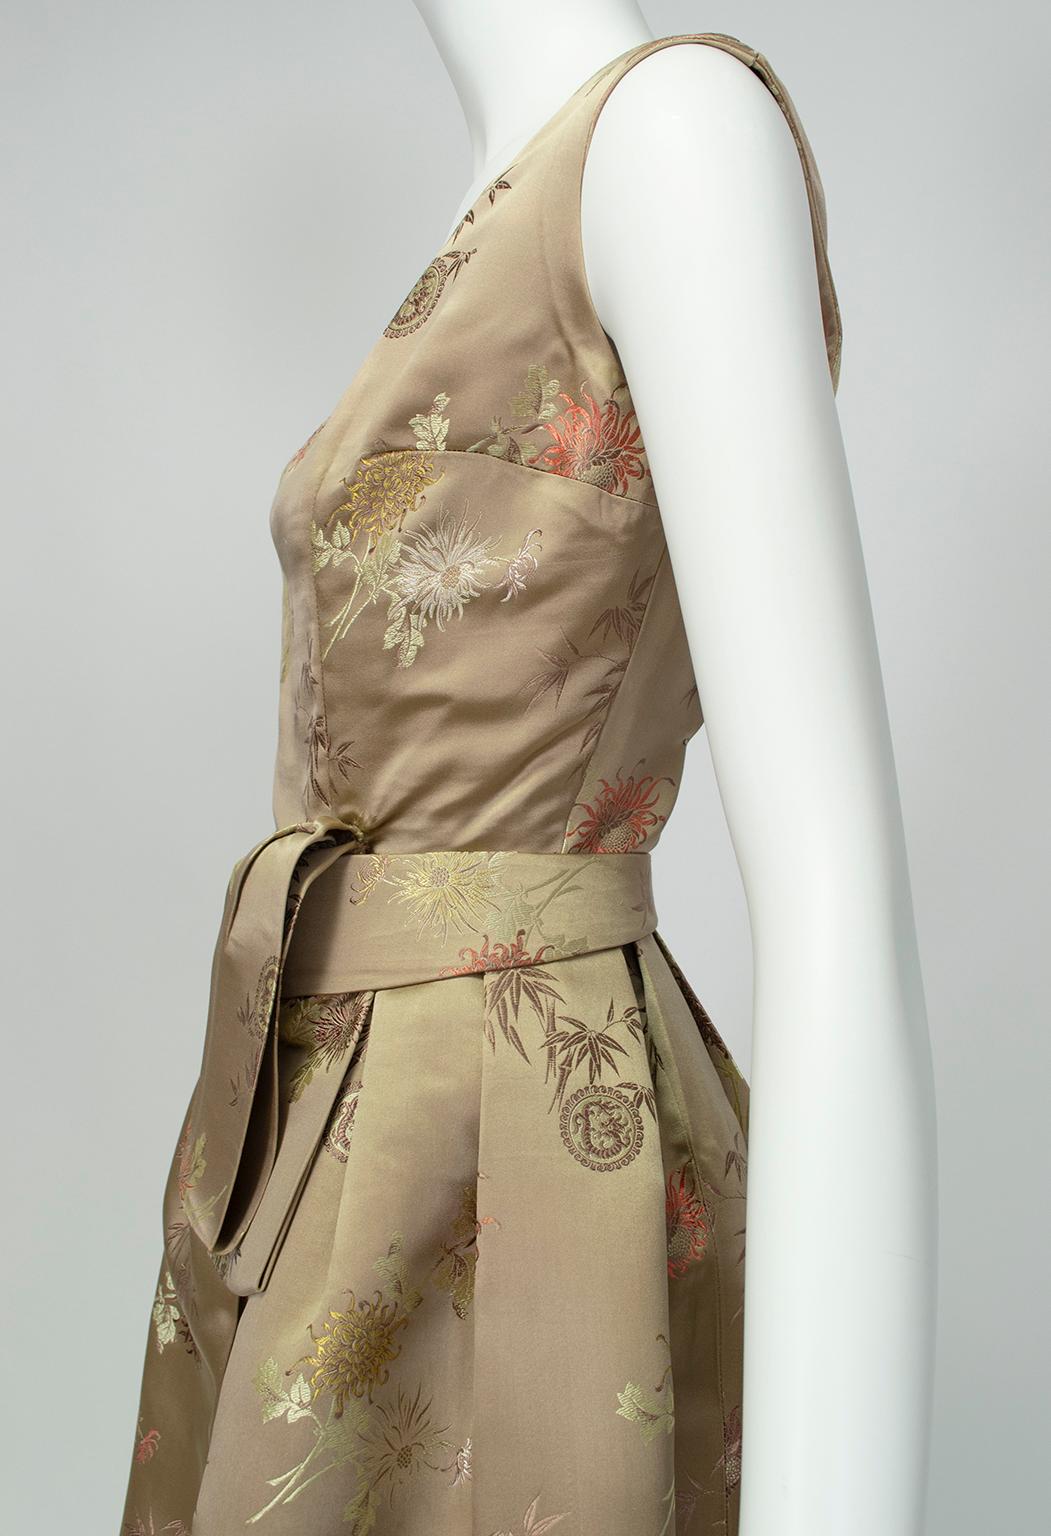 Jacques Cassia Haute Couture Taupe Brocade Corolle Tulip Skirt Dress - S, 1960s For Sale 1